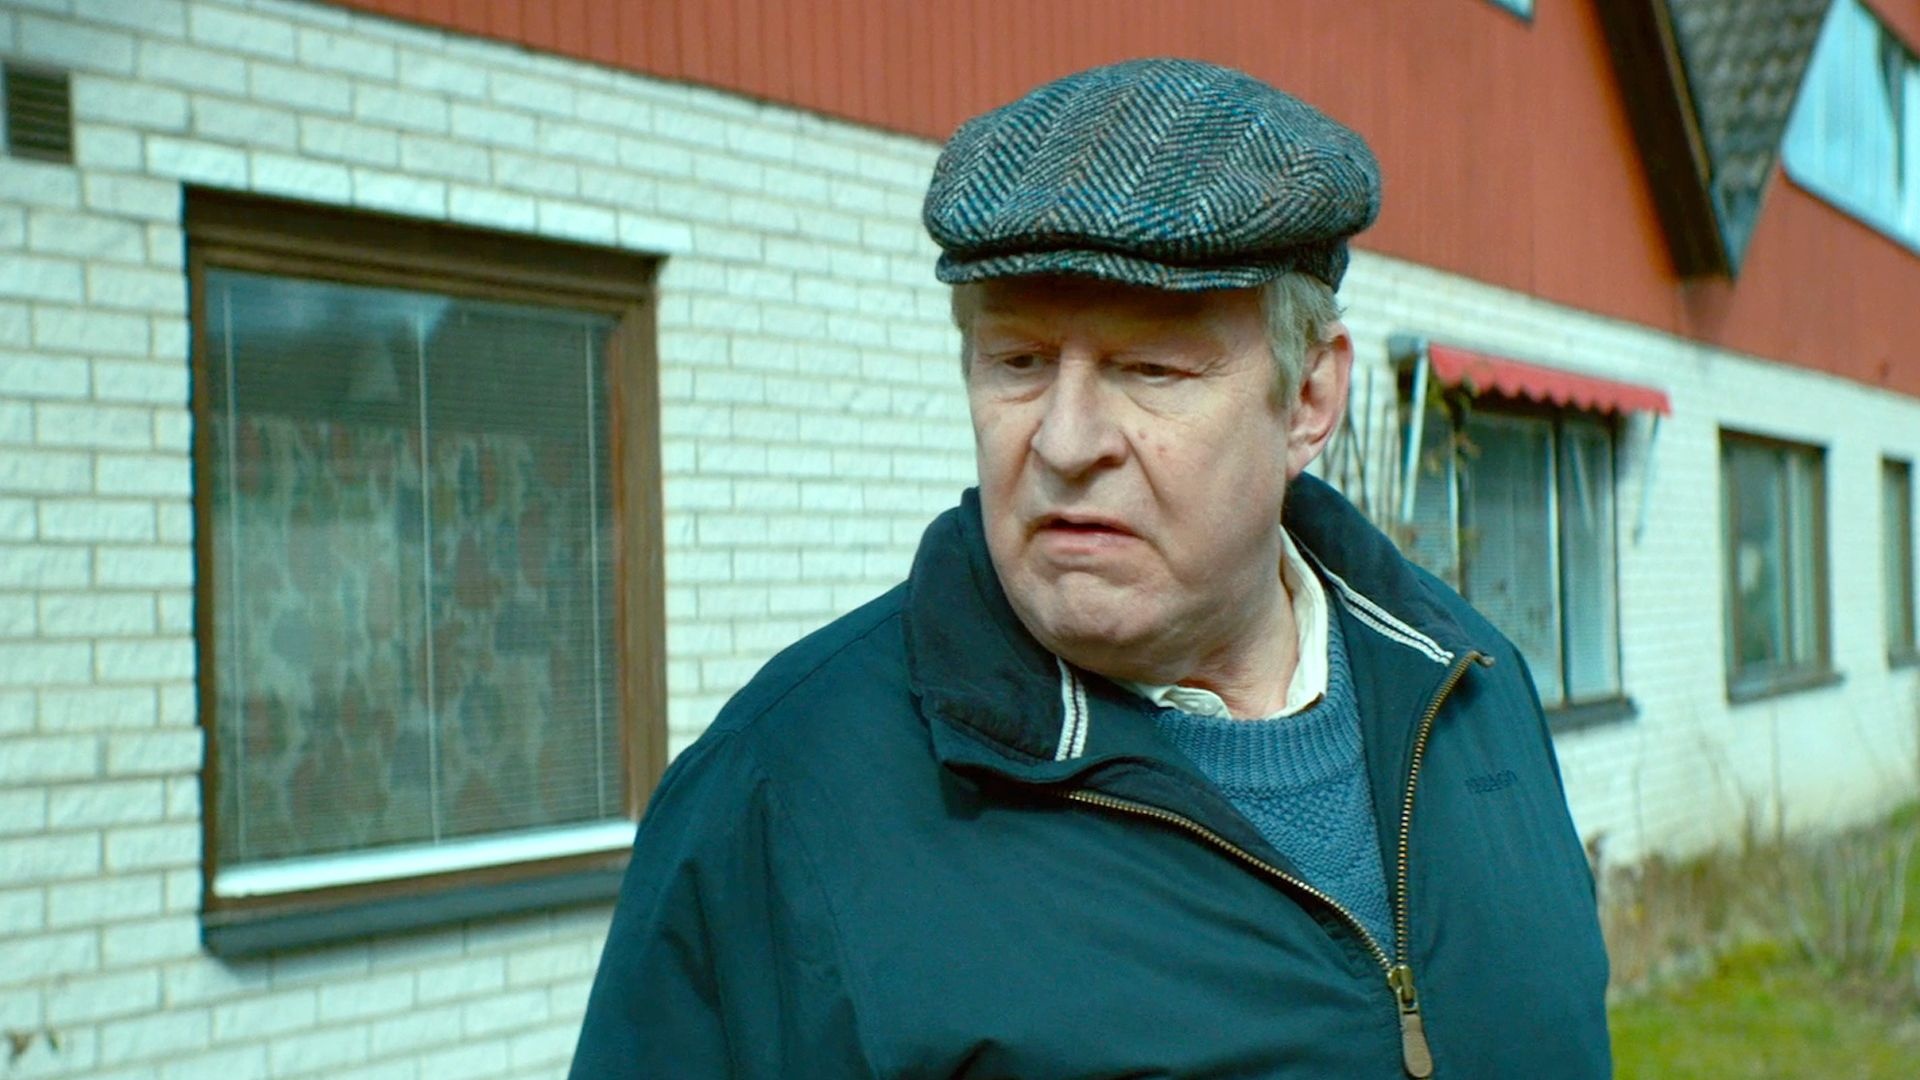 A Man Called Ove, Grumpy old man, Unexpected relationships, Heartwarming story, 1920x1080 Full HD Desktop